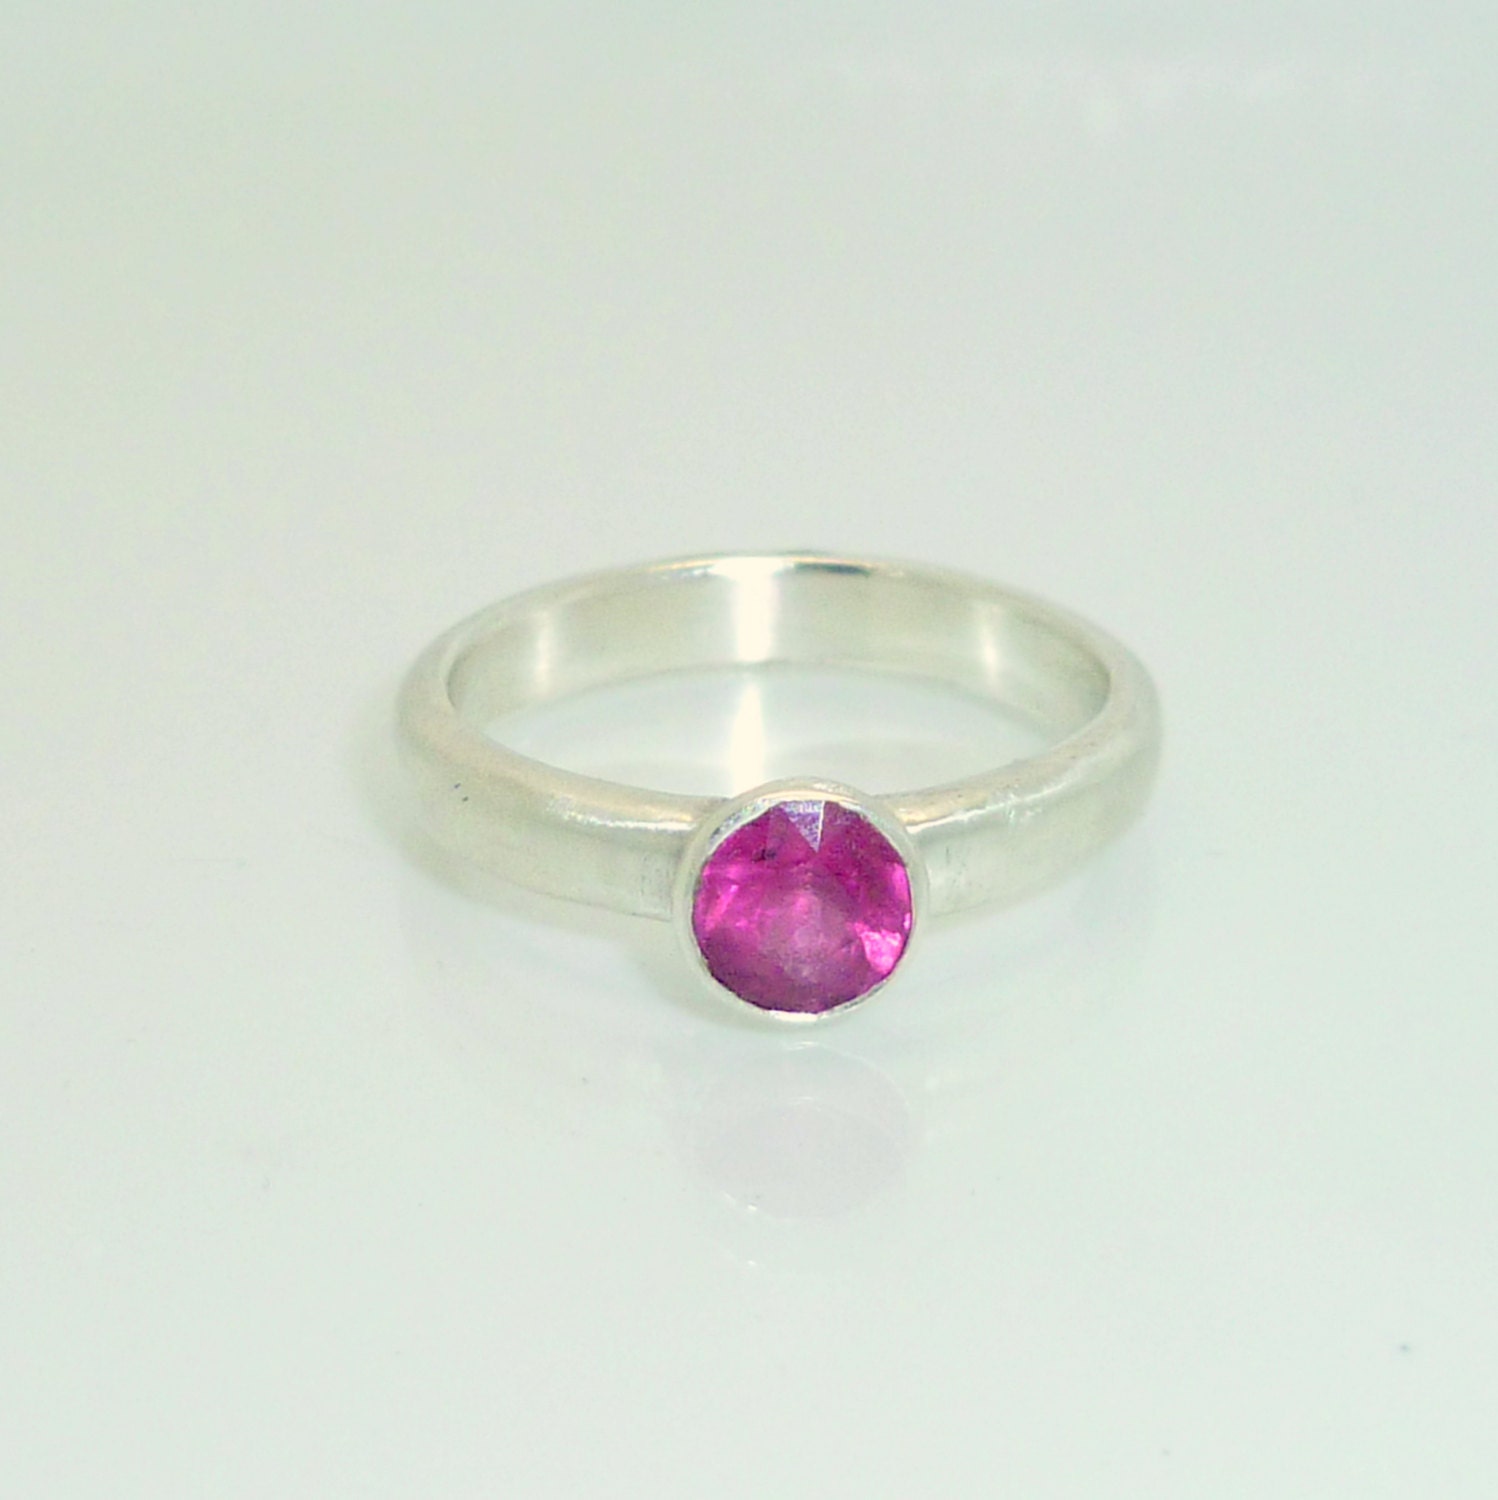 Pink Tourmaline and Silver Bezel Ring by BeatrizFortes on Etsy